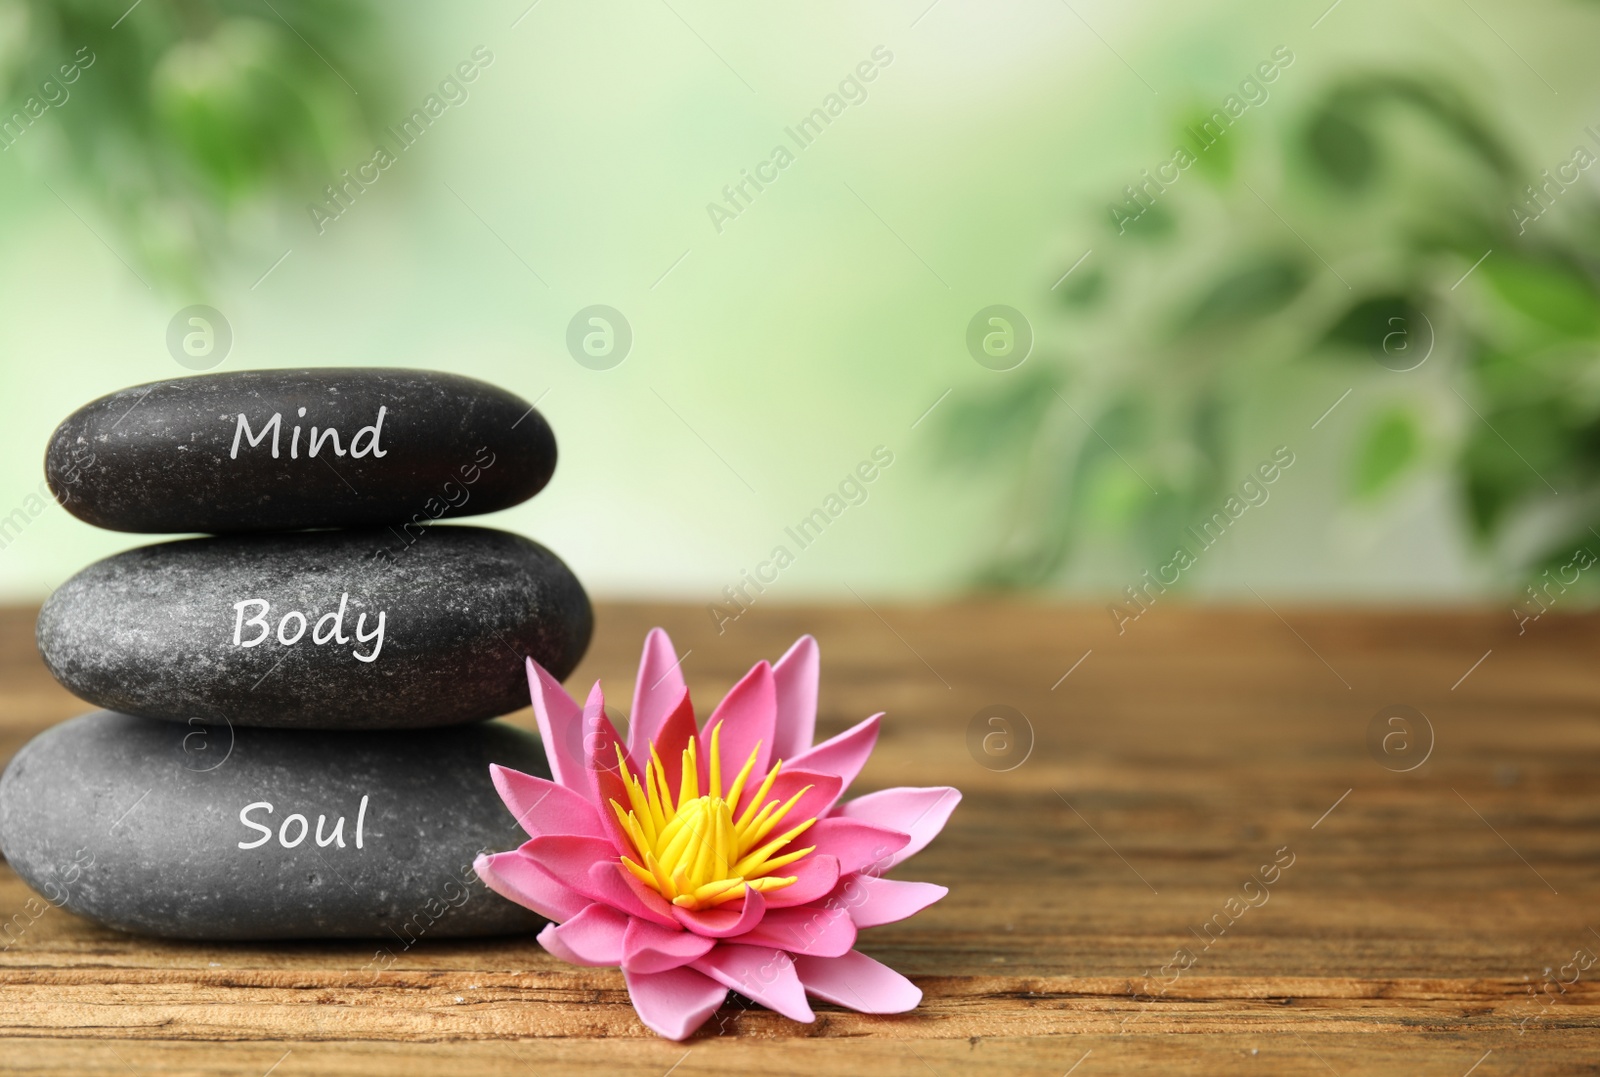 Photo of Stones with words Mind, Body, Soul and lotus flower on wooden table, space for text. Zen lifestyle